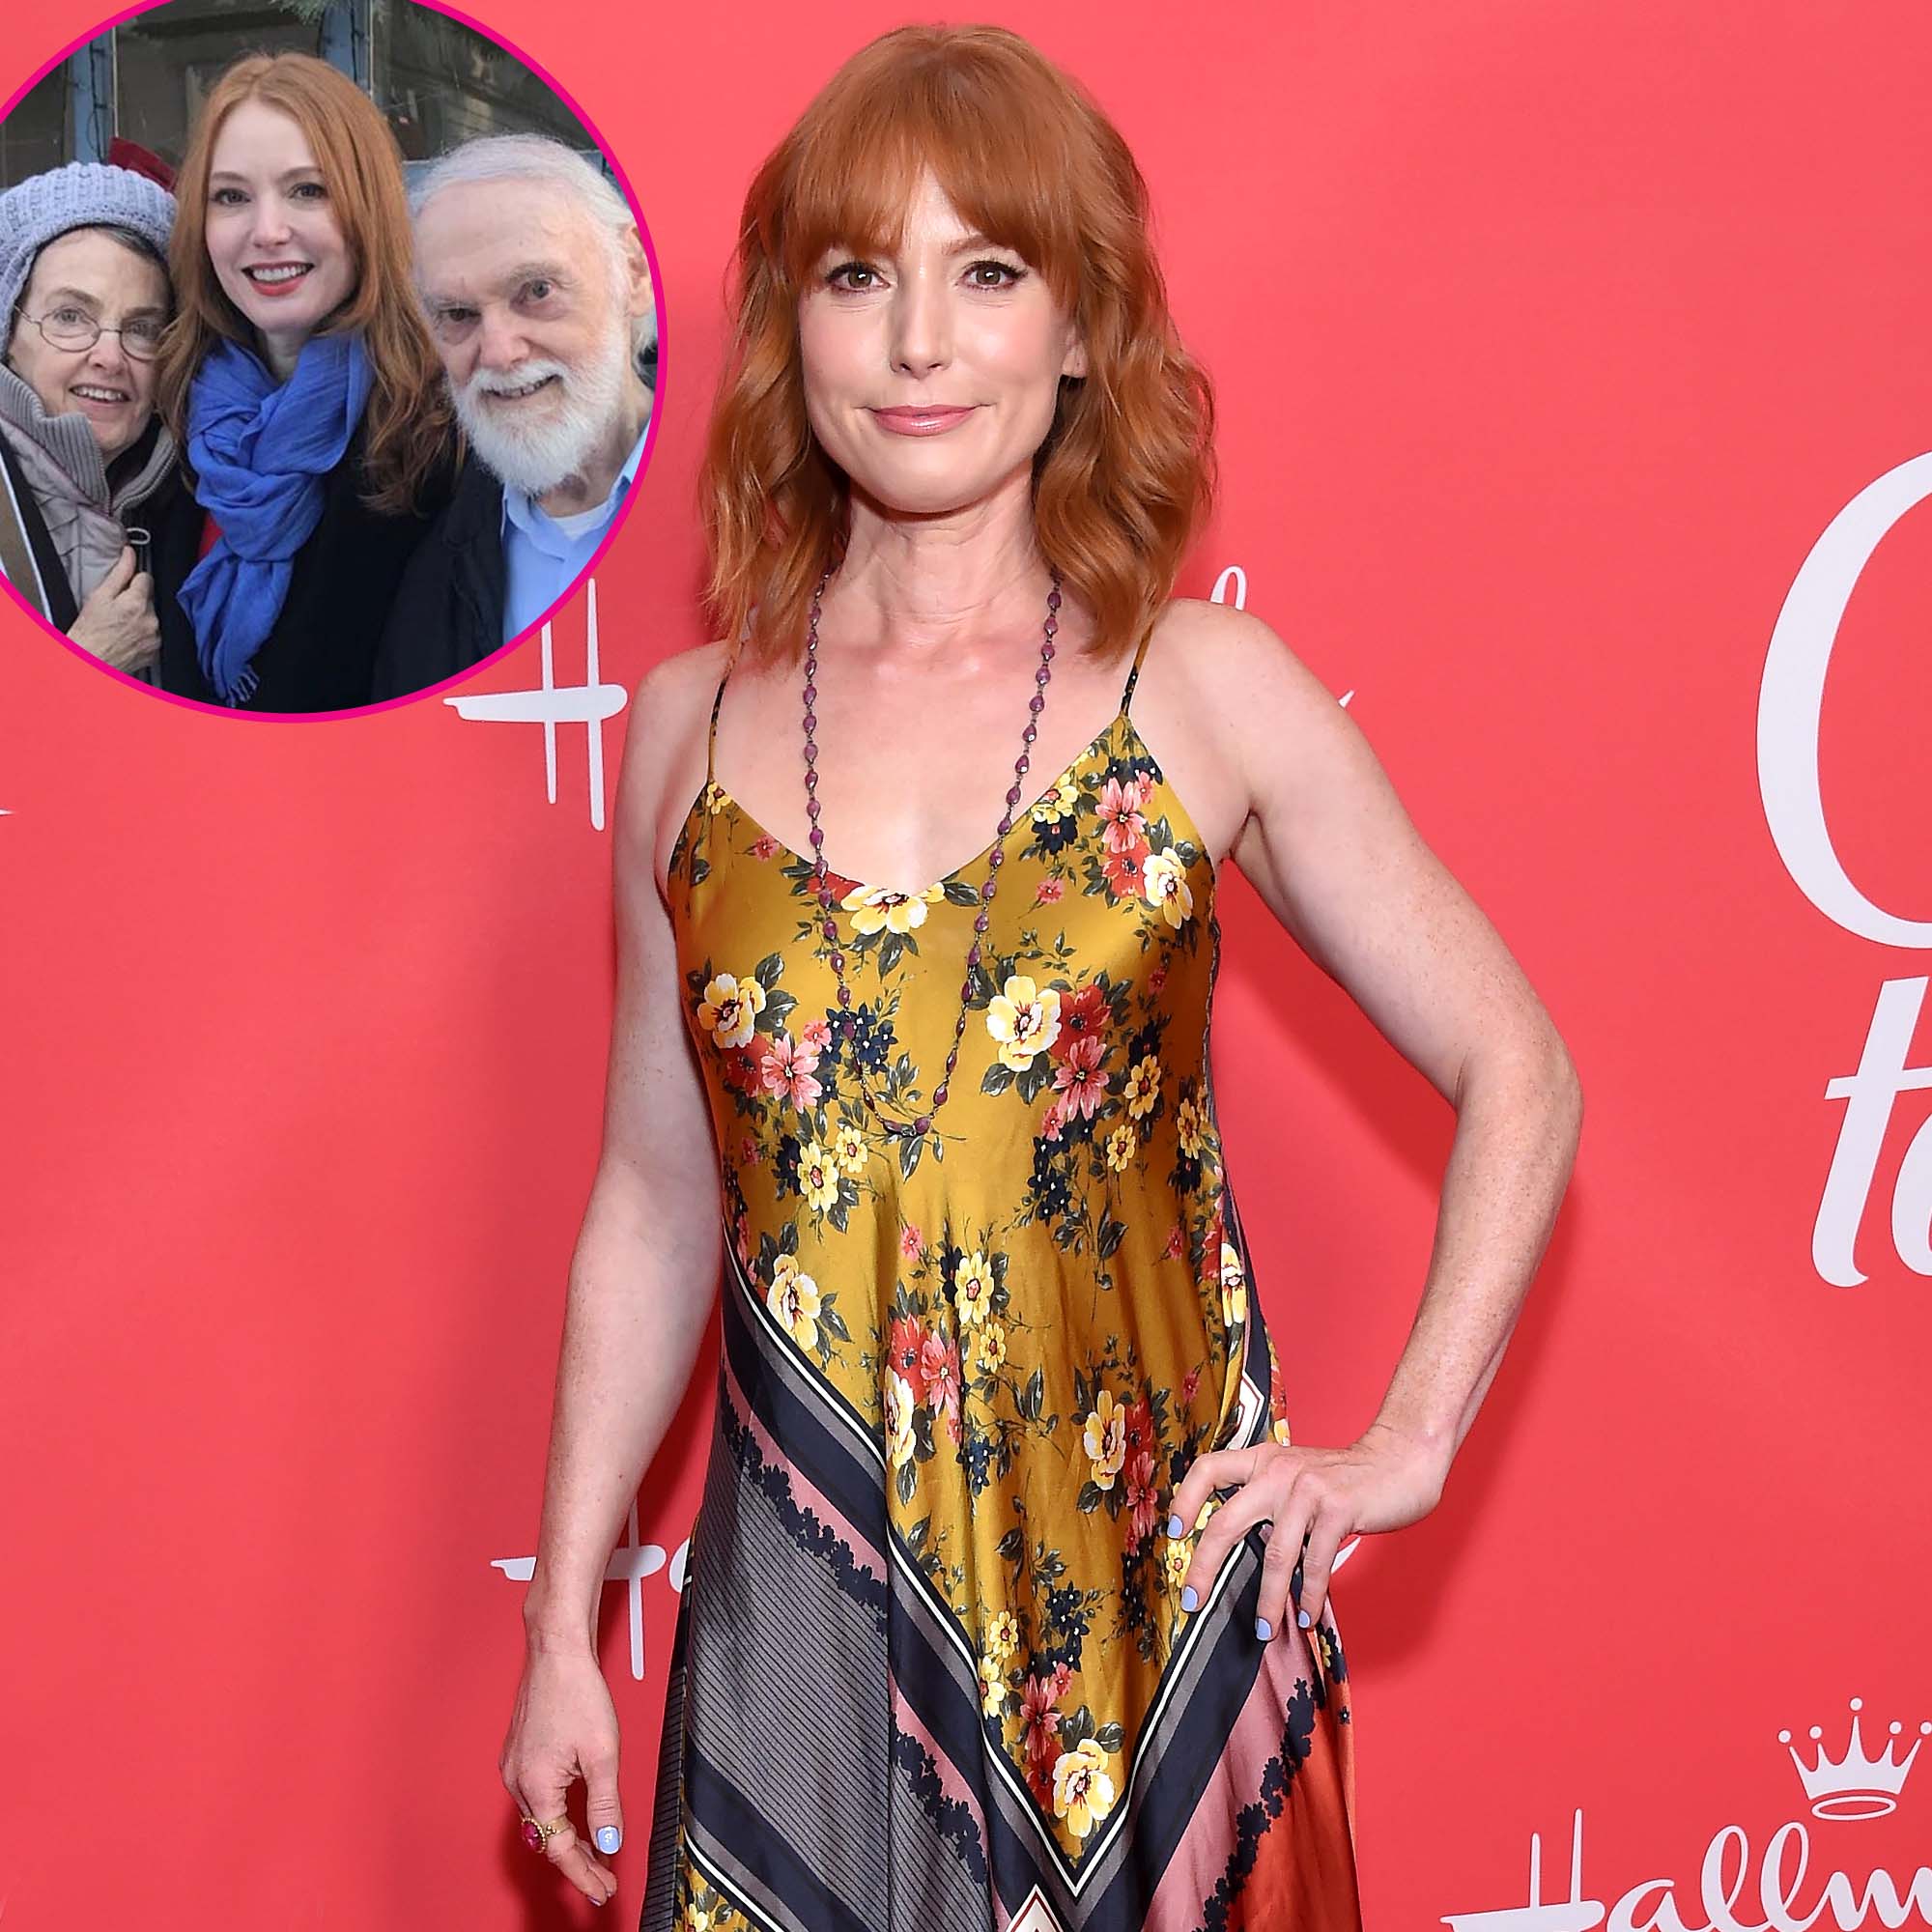 Natalie Hart Xxx - Alicia Witt's Family: Everything We Know About Her Parents, More